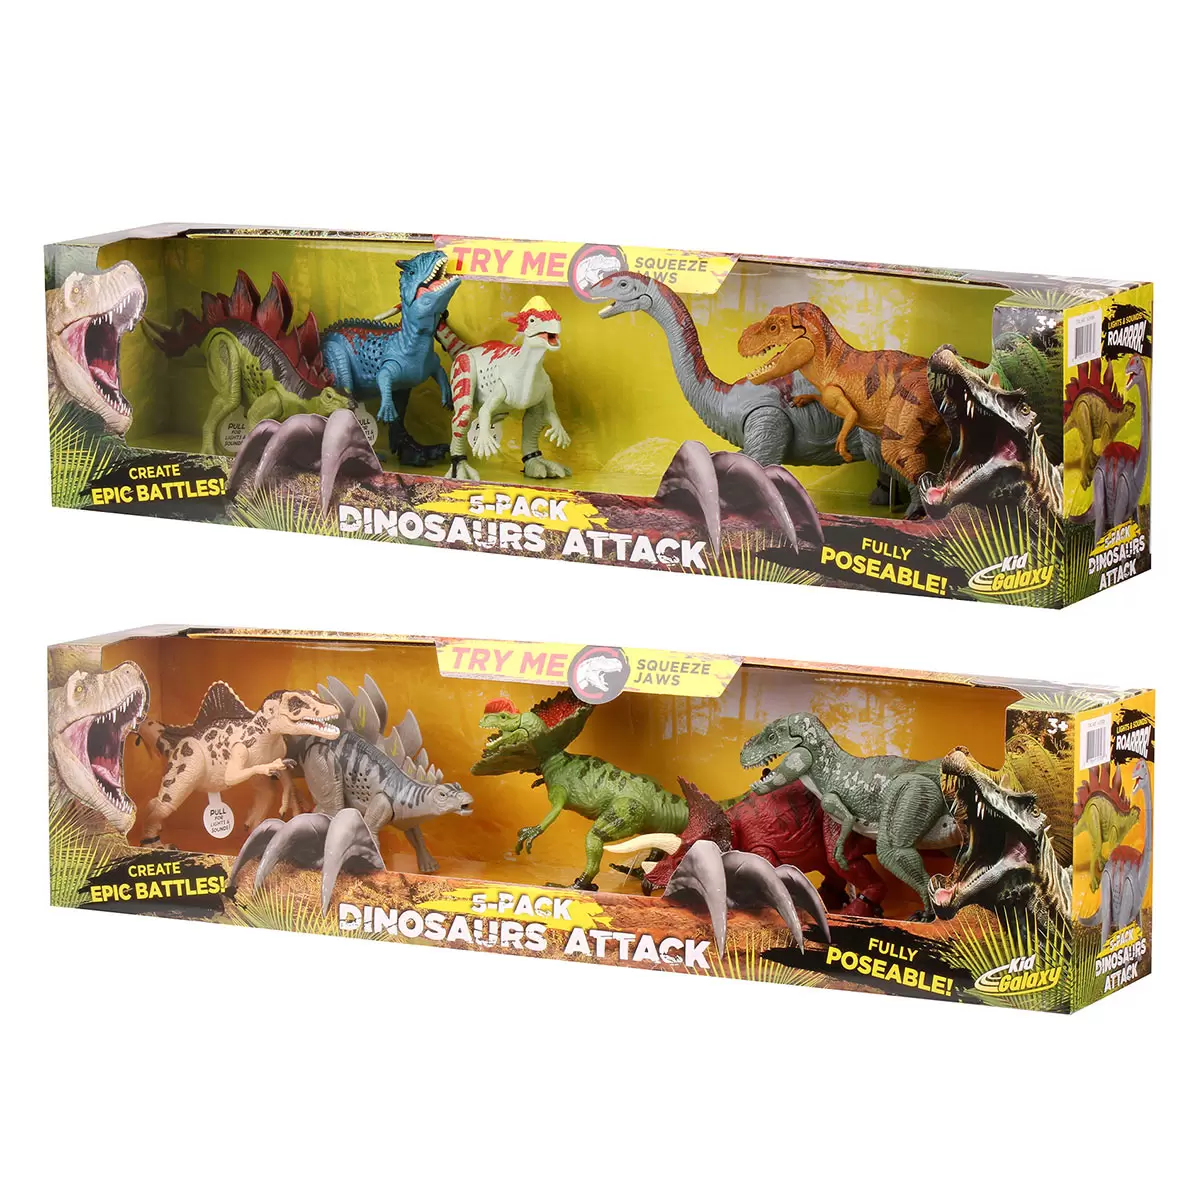 Buy Dinosaurs Attack 5 Pack Asst Combined Box Image at Costco.co.uk